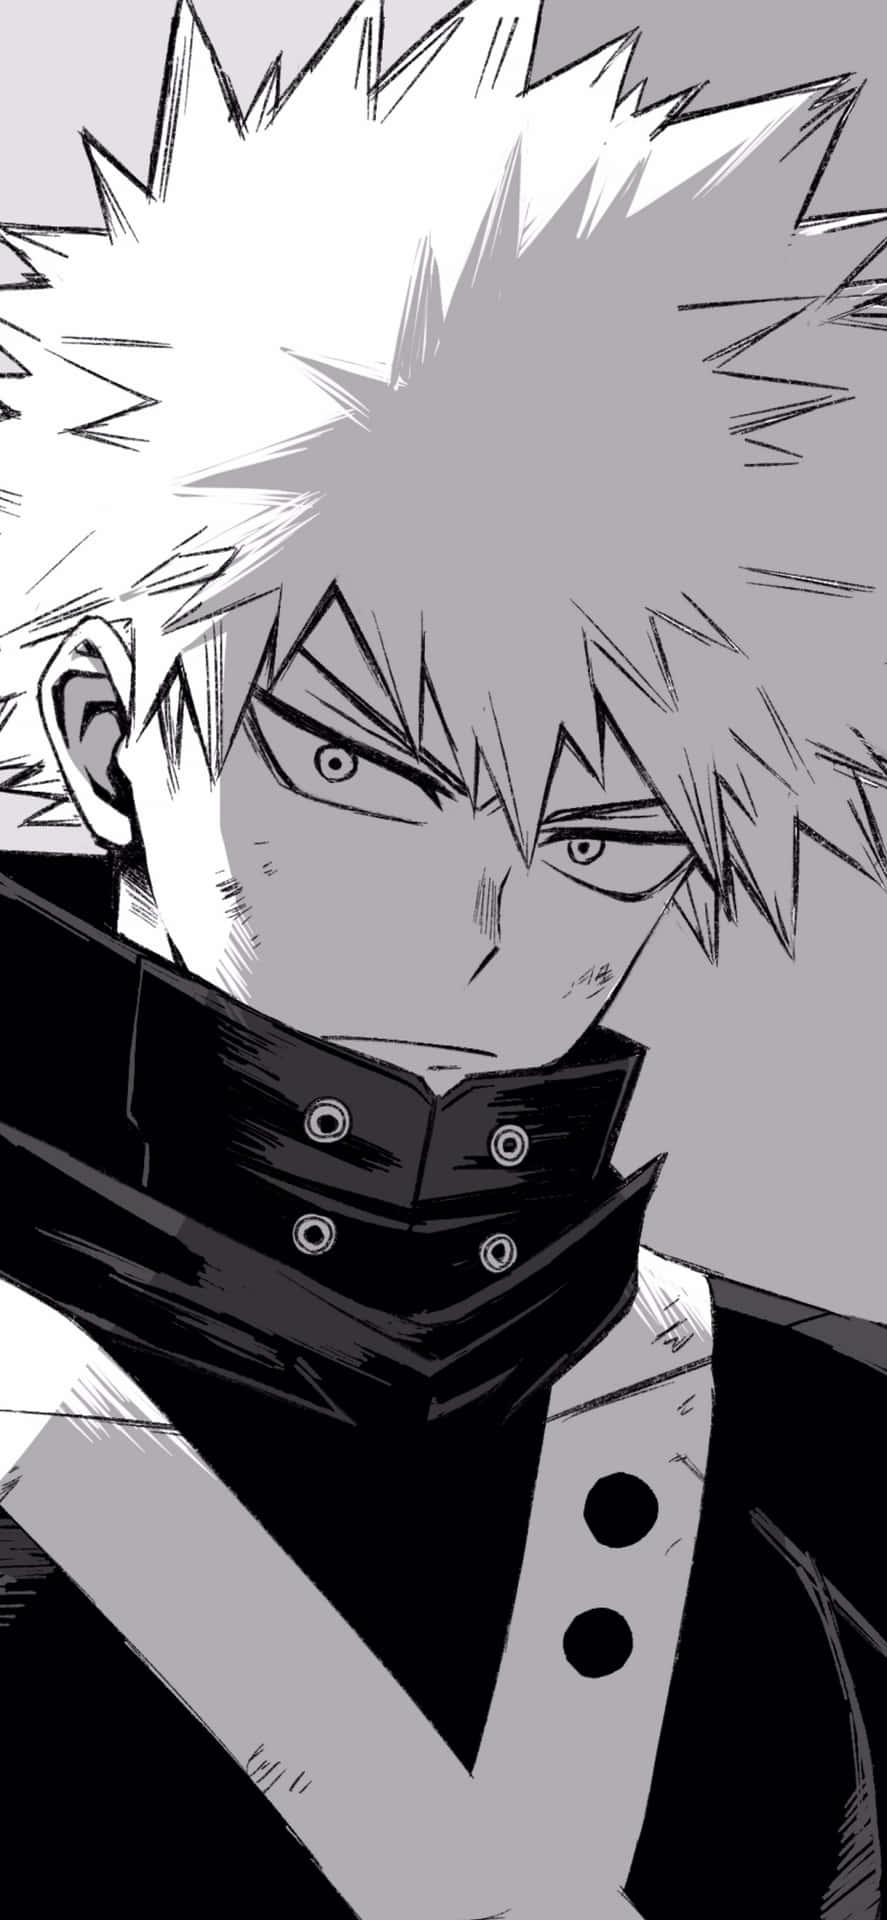 Bakugou - A fierce and explosive hero in action